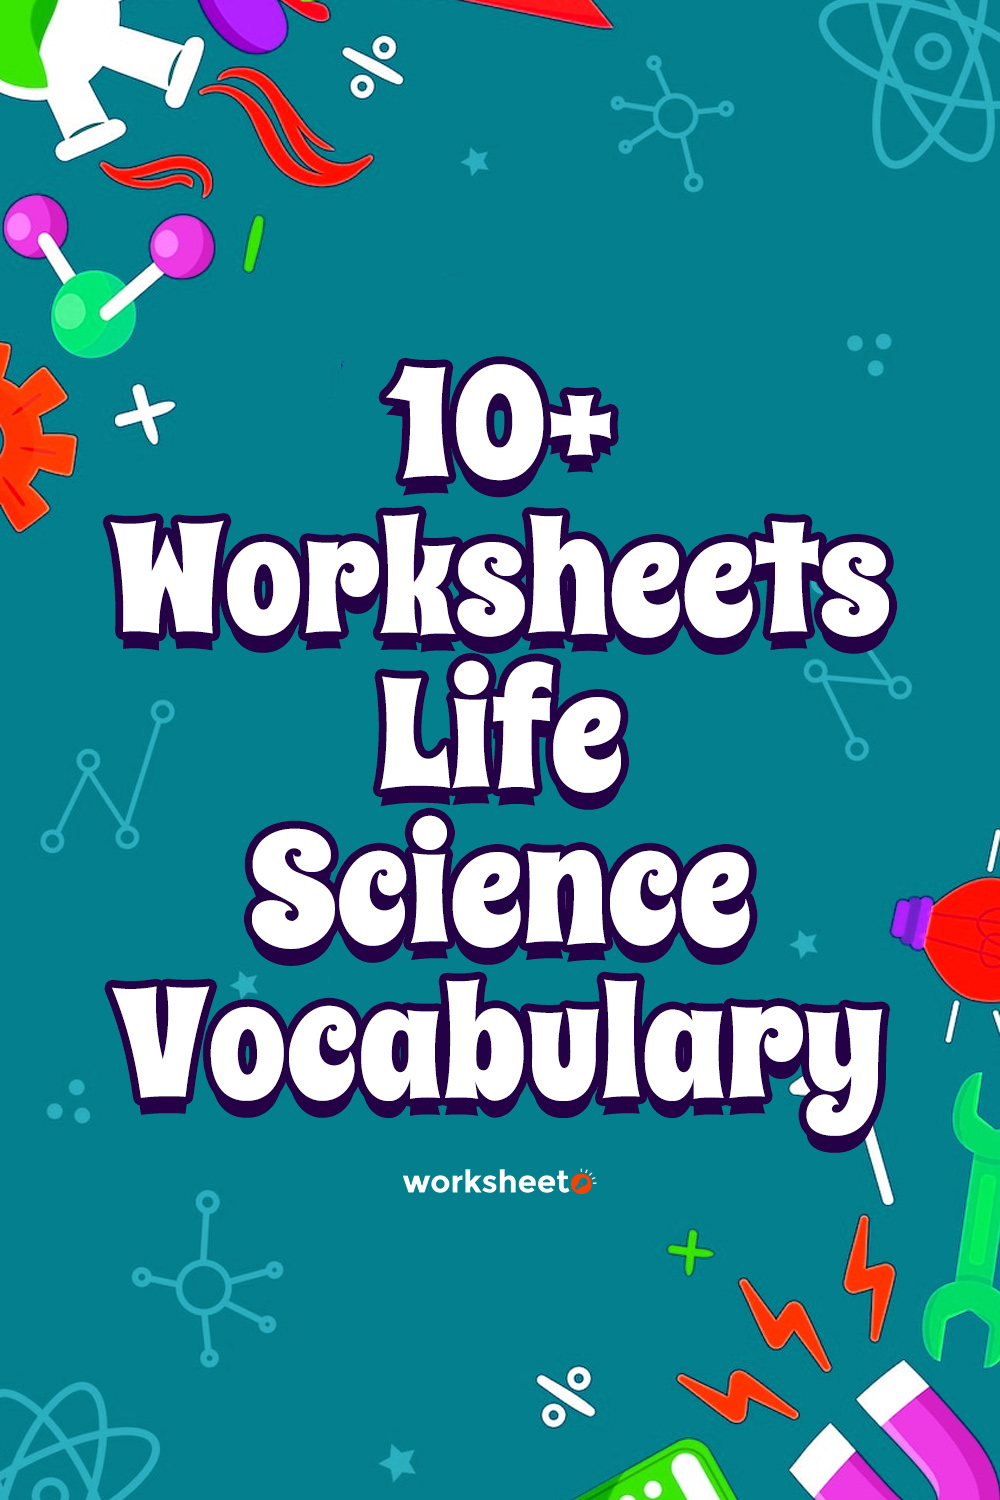 15 Images of Worksheets Life Science Vocabulary